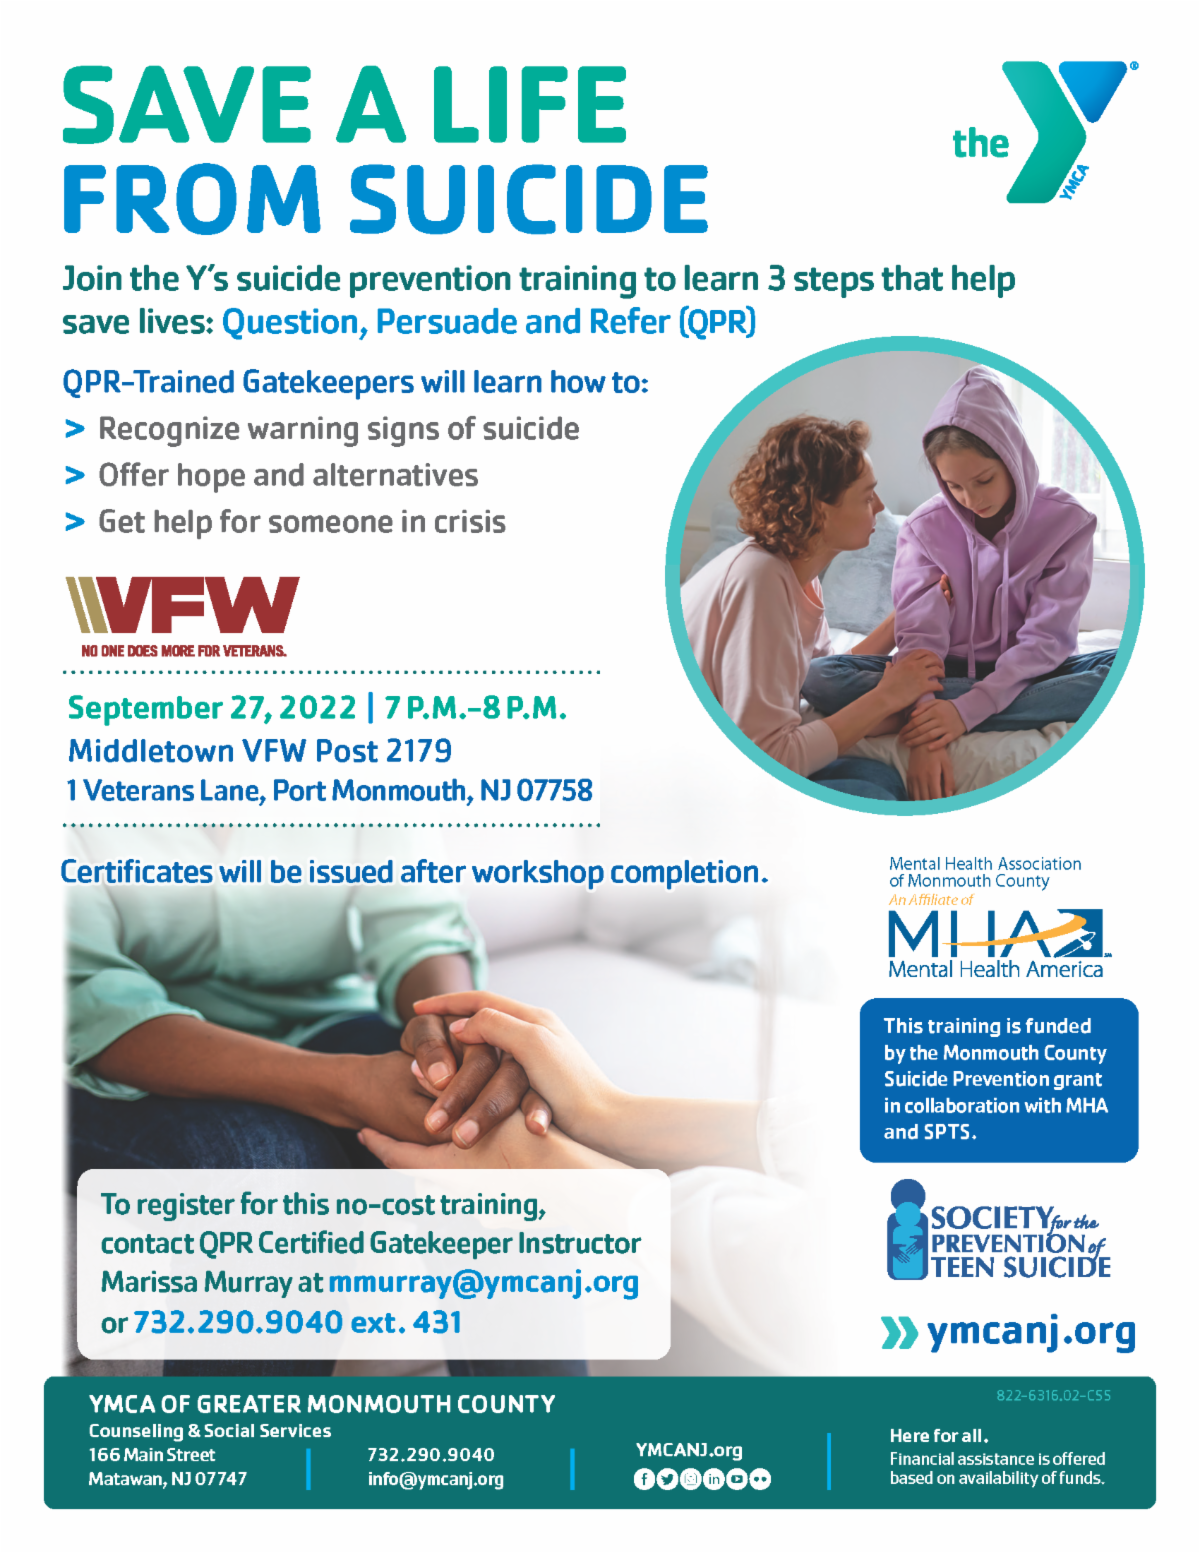 Community YMCA Training Flyer on Suicide Prevention.